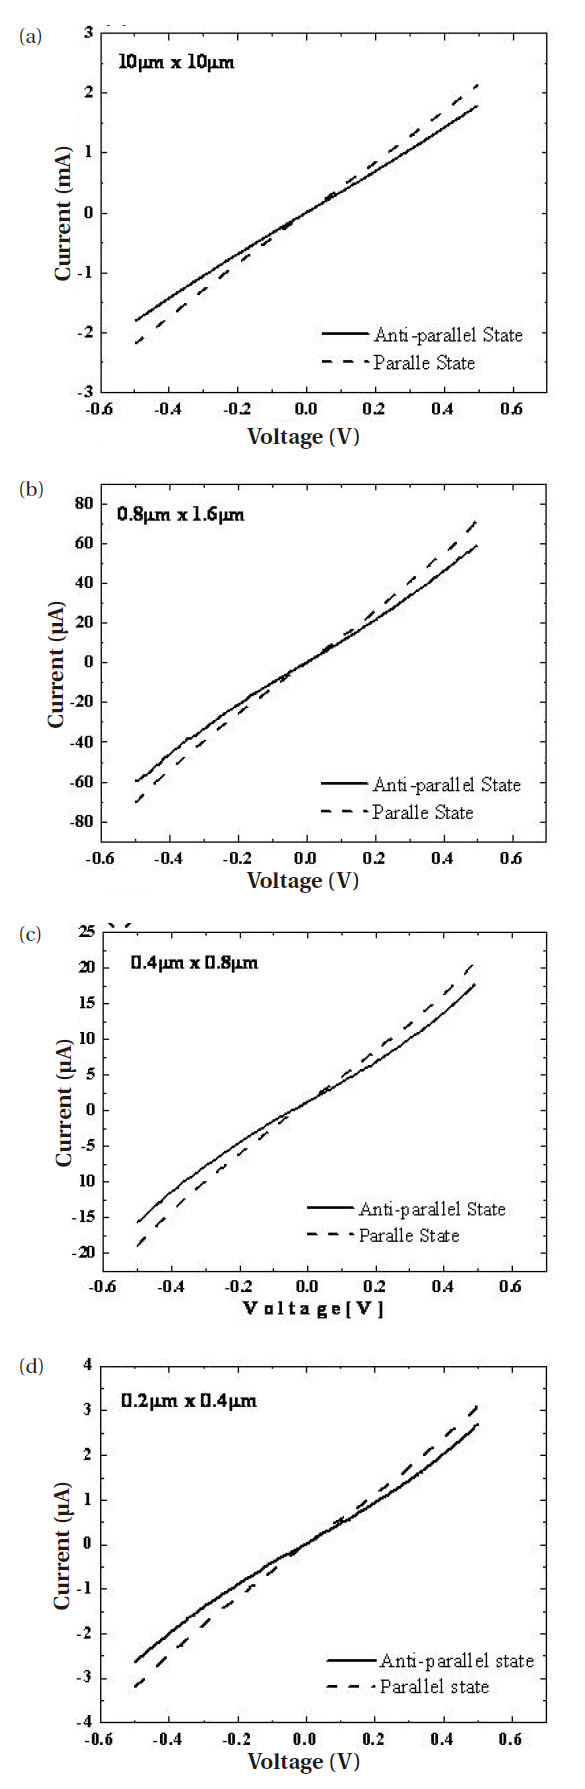 The magnetoresistance with respect to the applied voltage: (a) 10 ㎛ × 10 ㎛ (b) 1.6 ㎛ × 0.8 ㎛ (c) 0.8 ㎛ × 0.4 ㎛ and (d) 0.4㎛ × 0.2 ㎛.